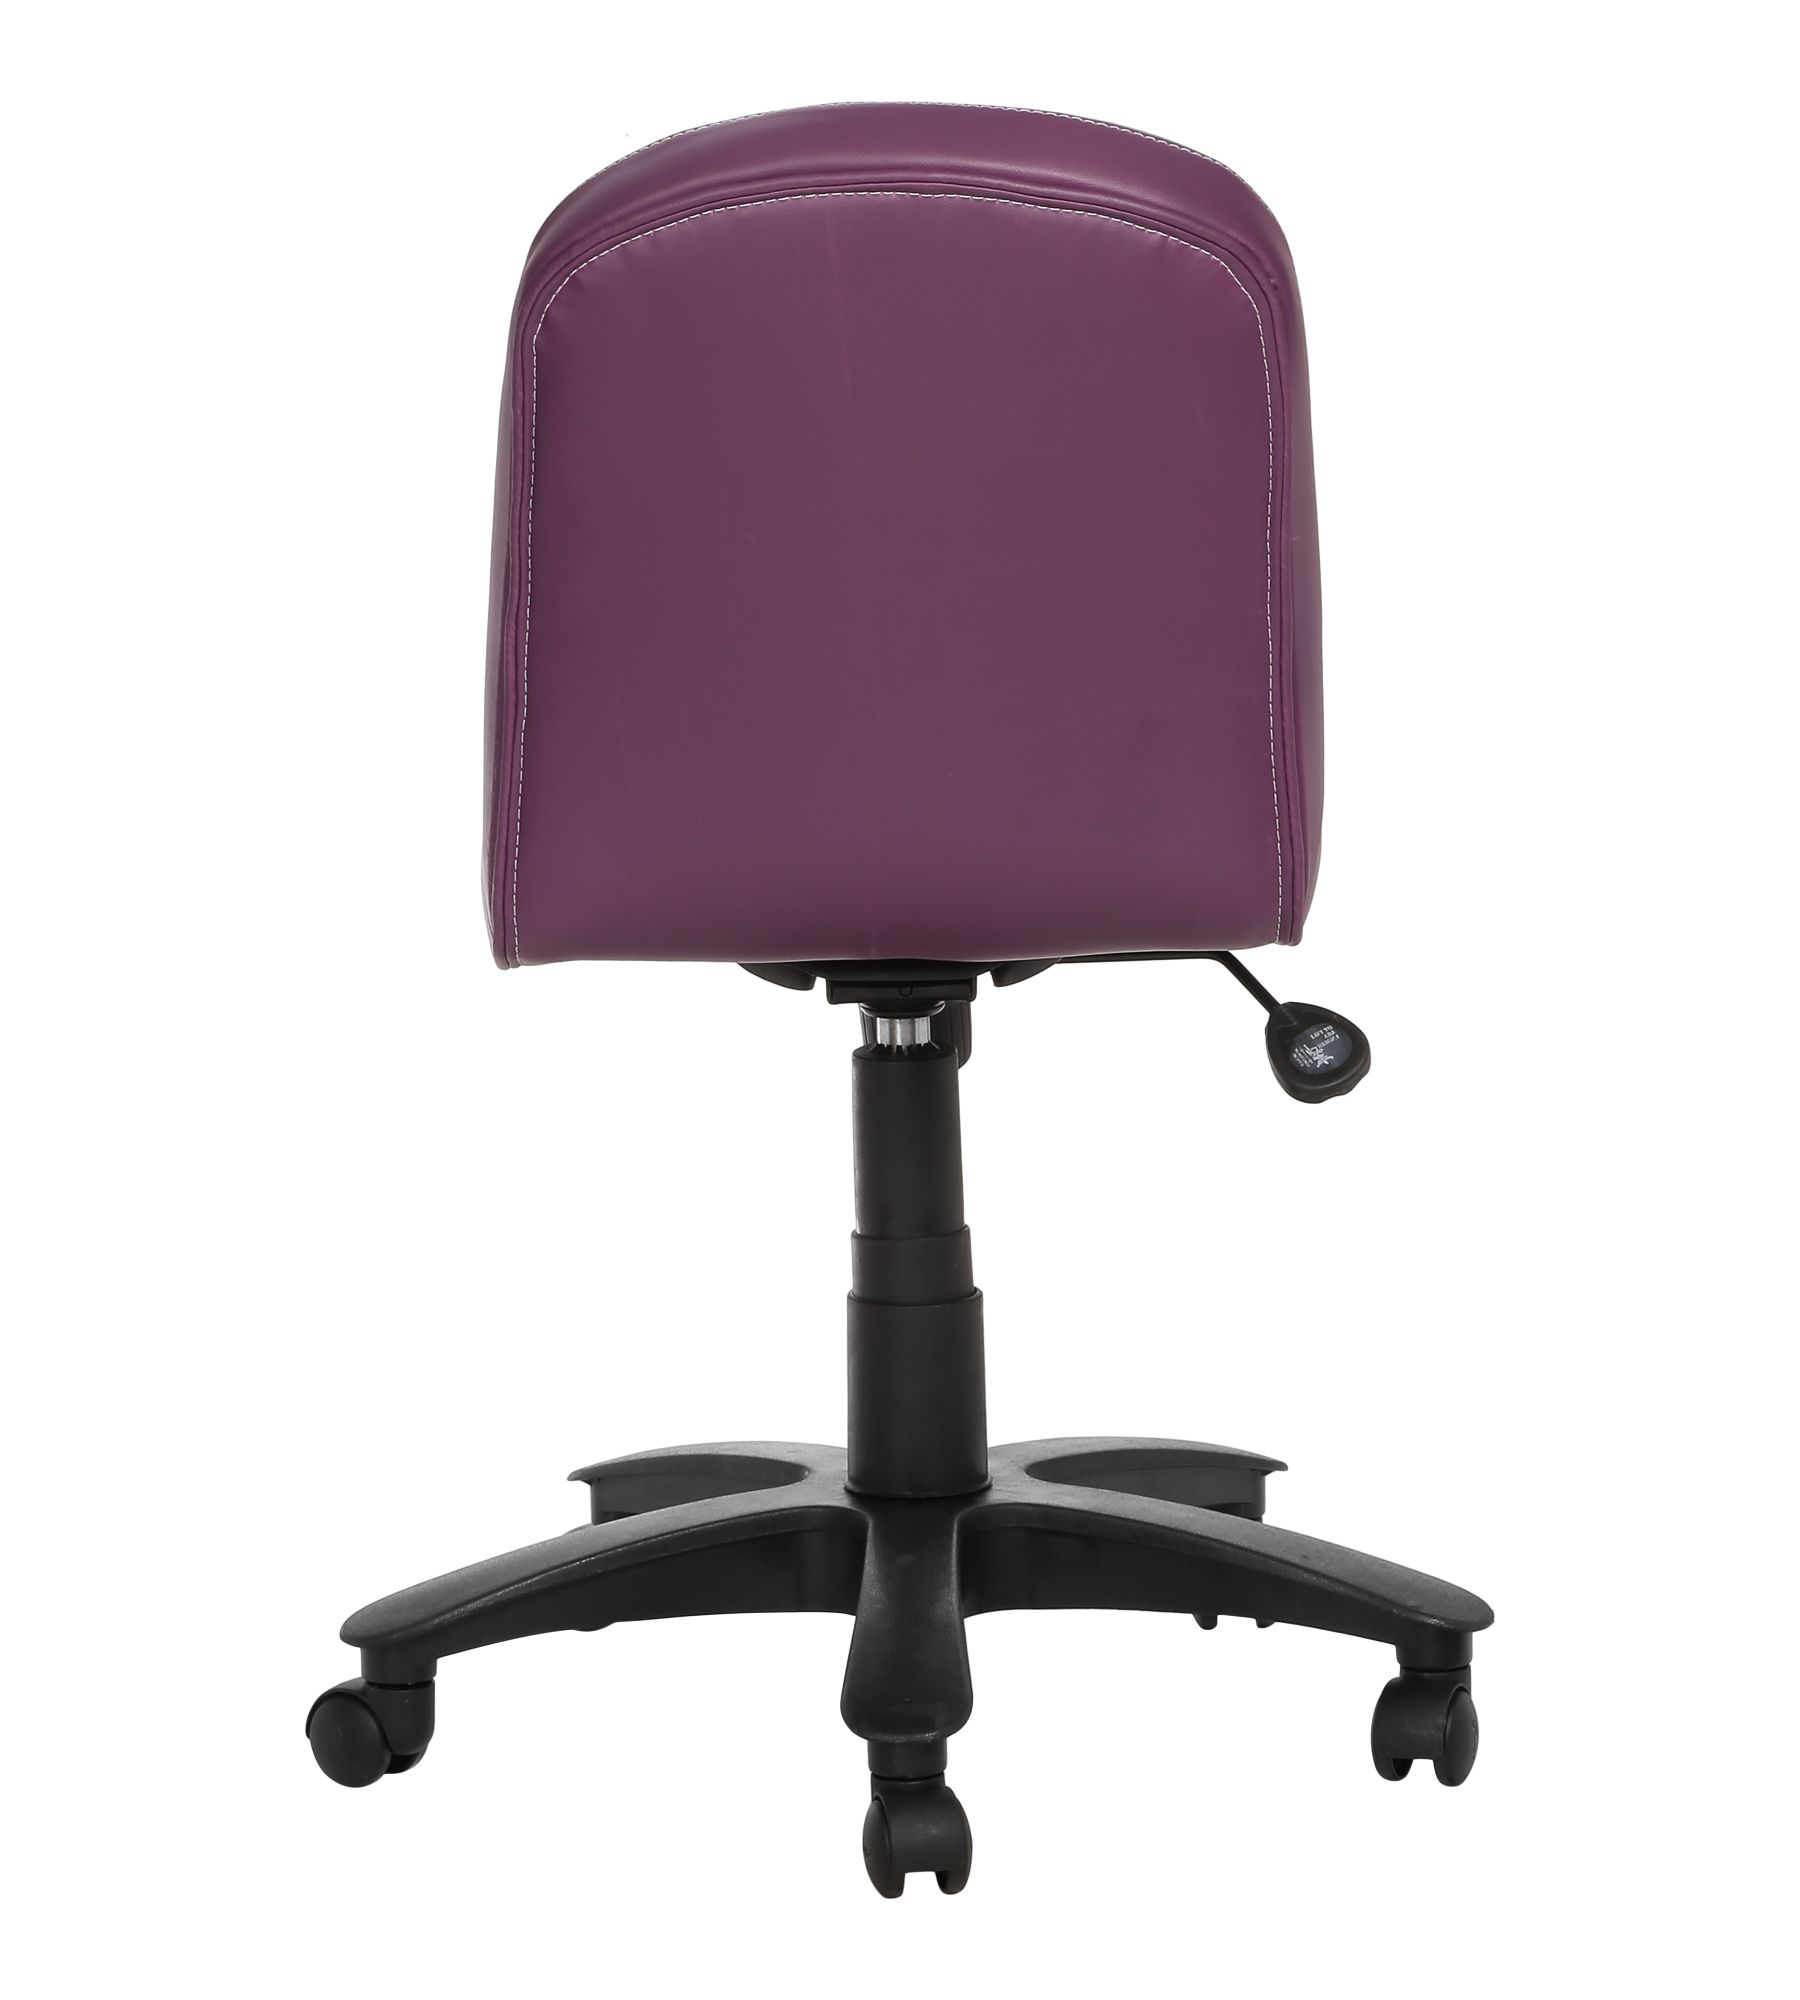 LOW BACK OFFICE CHAIR PURPLE AND BLACK - Buy LOW BACK OFFICE CHAIR